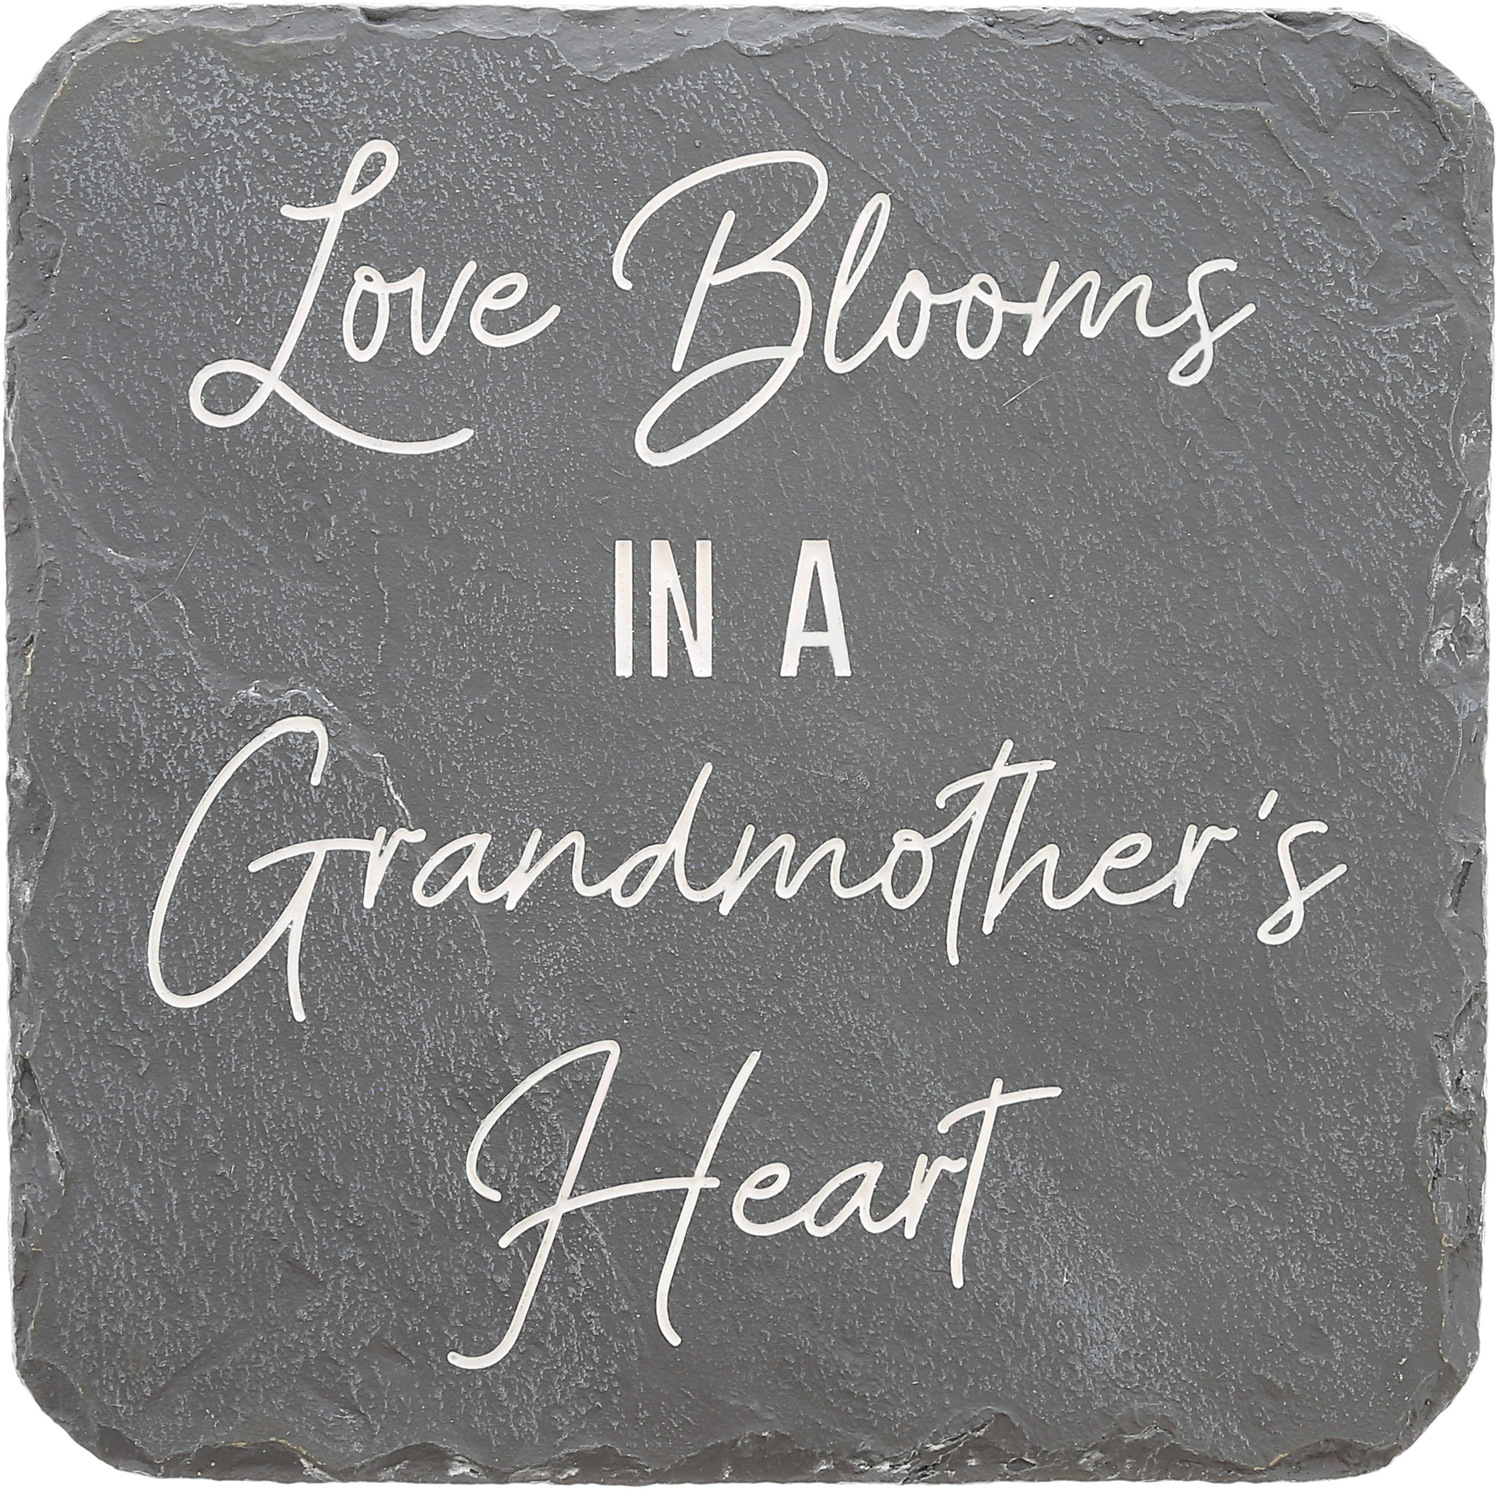 Grandmother's by Stones with Stories - Grandmother's - 7.75" x 7.75" Garden Stone